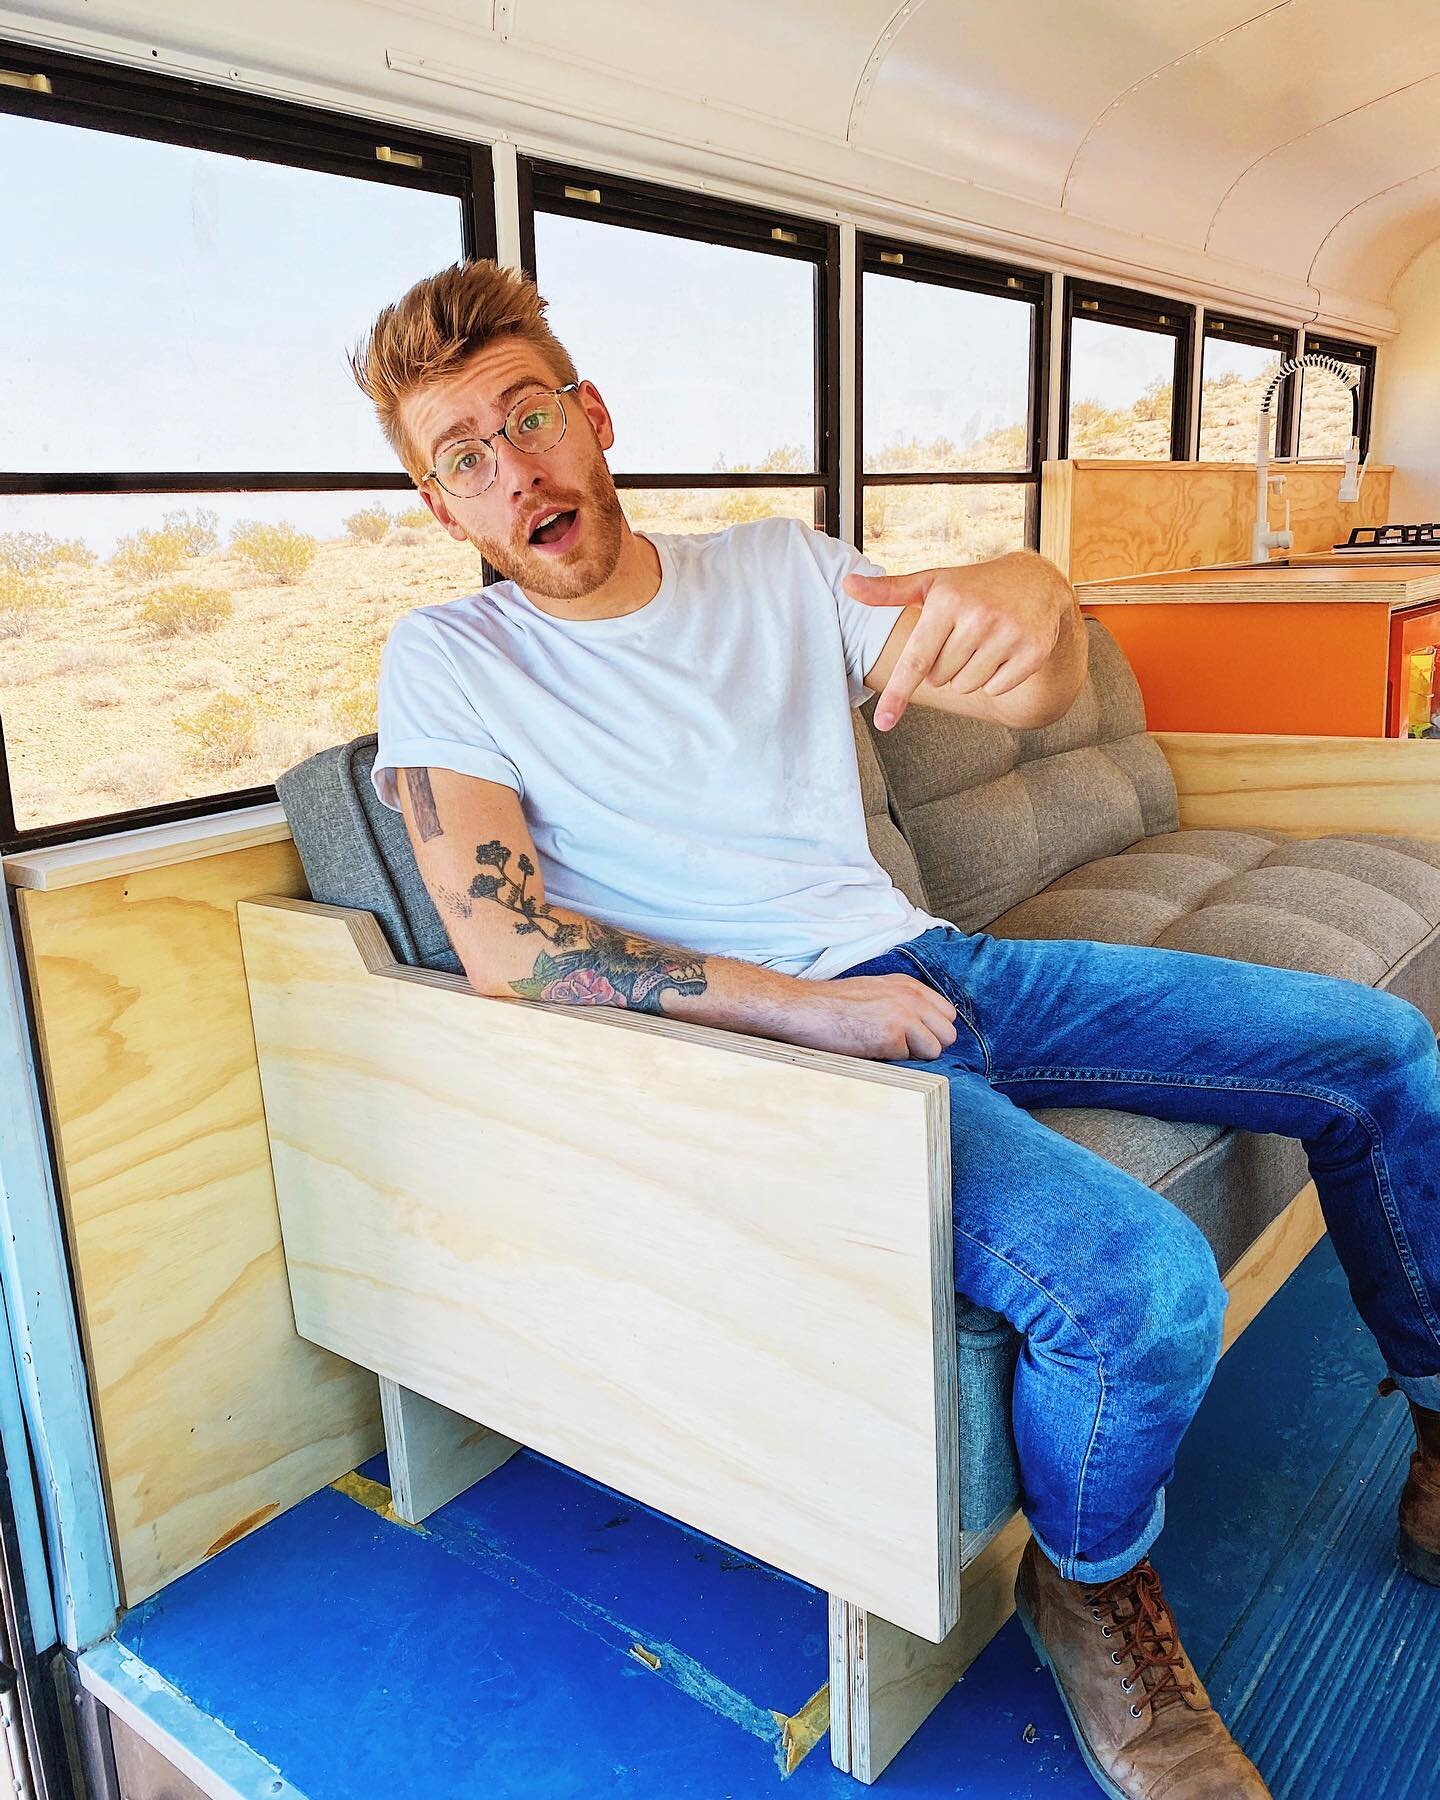 The DIY Sleeper Sofa made it into the Bus and fits great!! Living room build episode coming to YouTube this week 😁😁
-
-
-
-
-
#diysofa #tinyhouse #tinyhome #schoolbusconversion #plywoodfurniture #mikemontgomery #modernbuilds